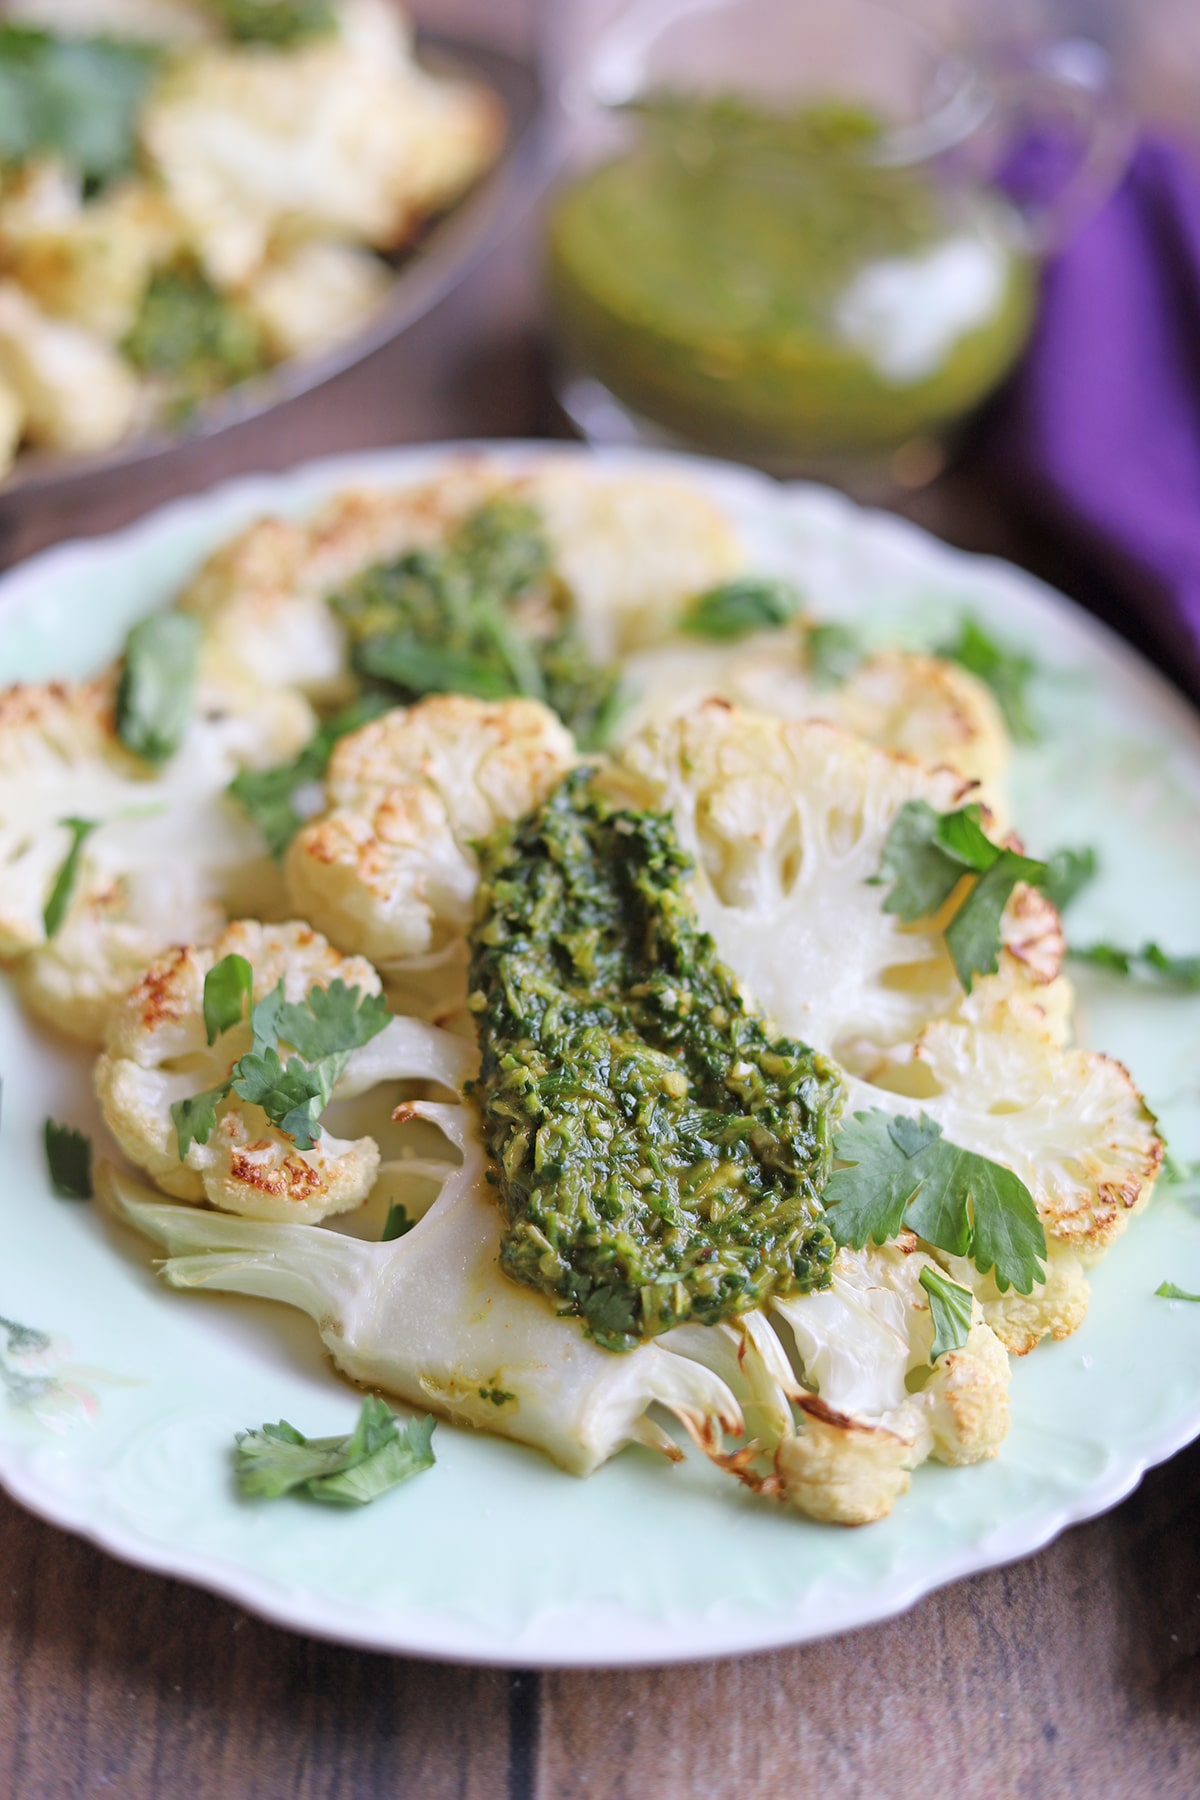 Two cauliflower steaks on plate with chimichurri.